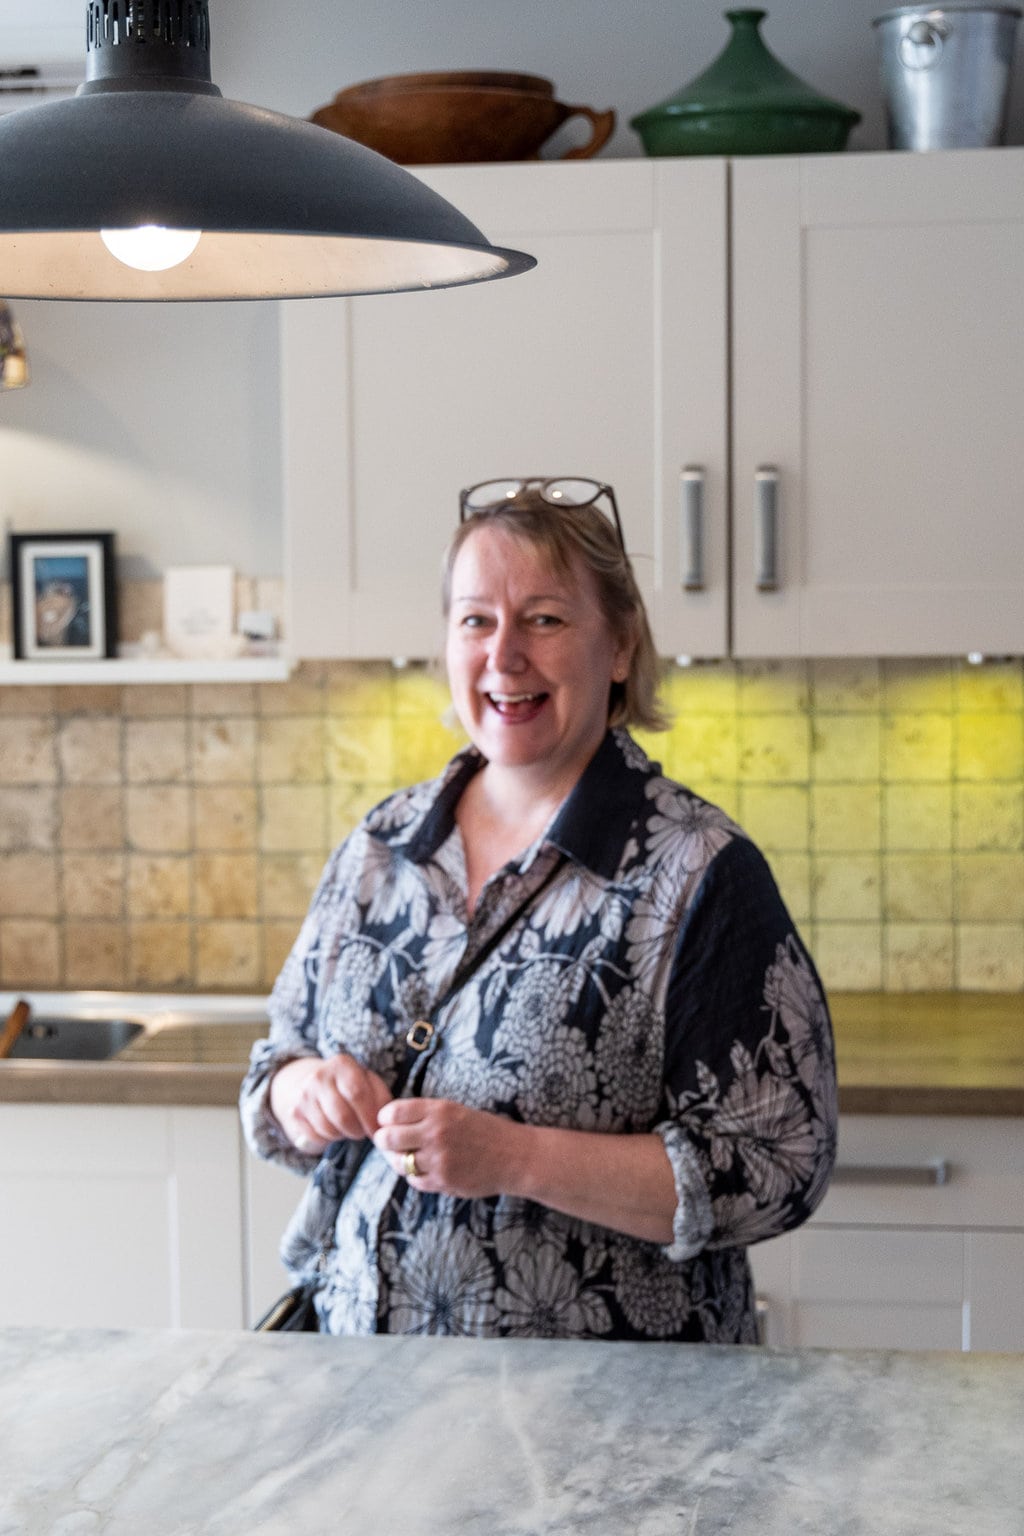 Lucy Vanel, founder of Plum Lyon Cooking Classes in her teaching kitchen.